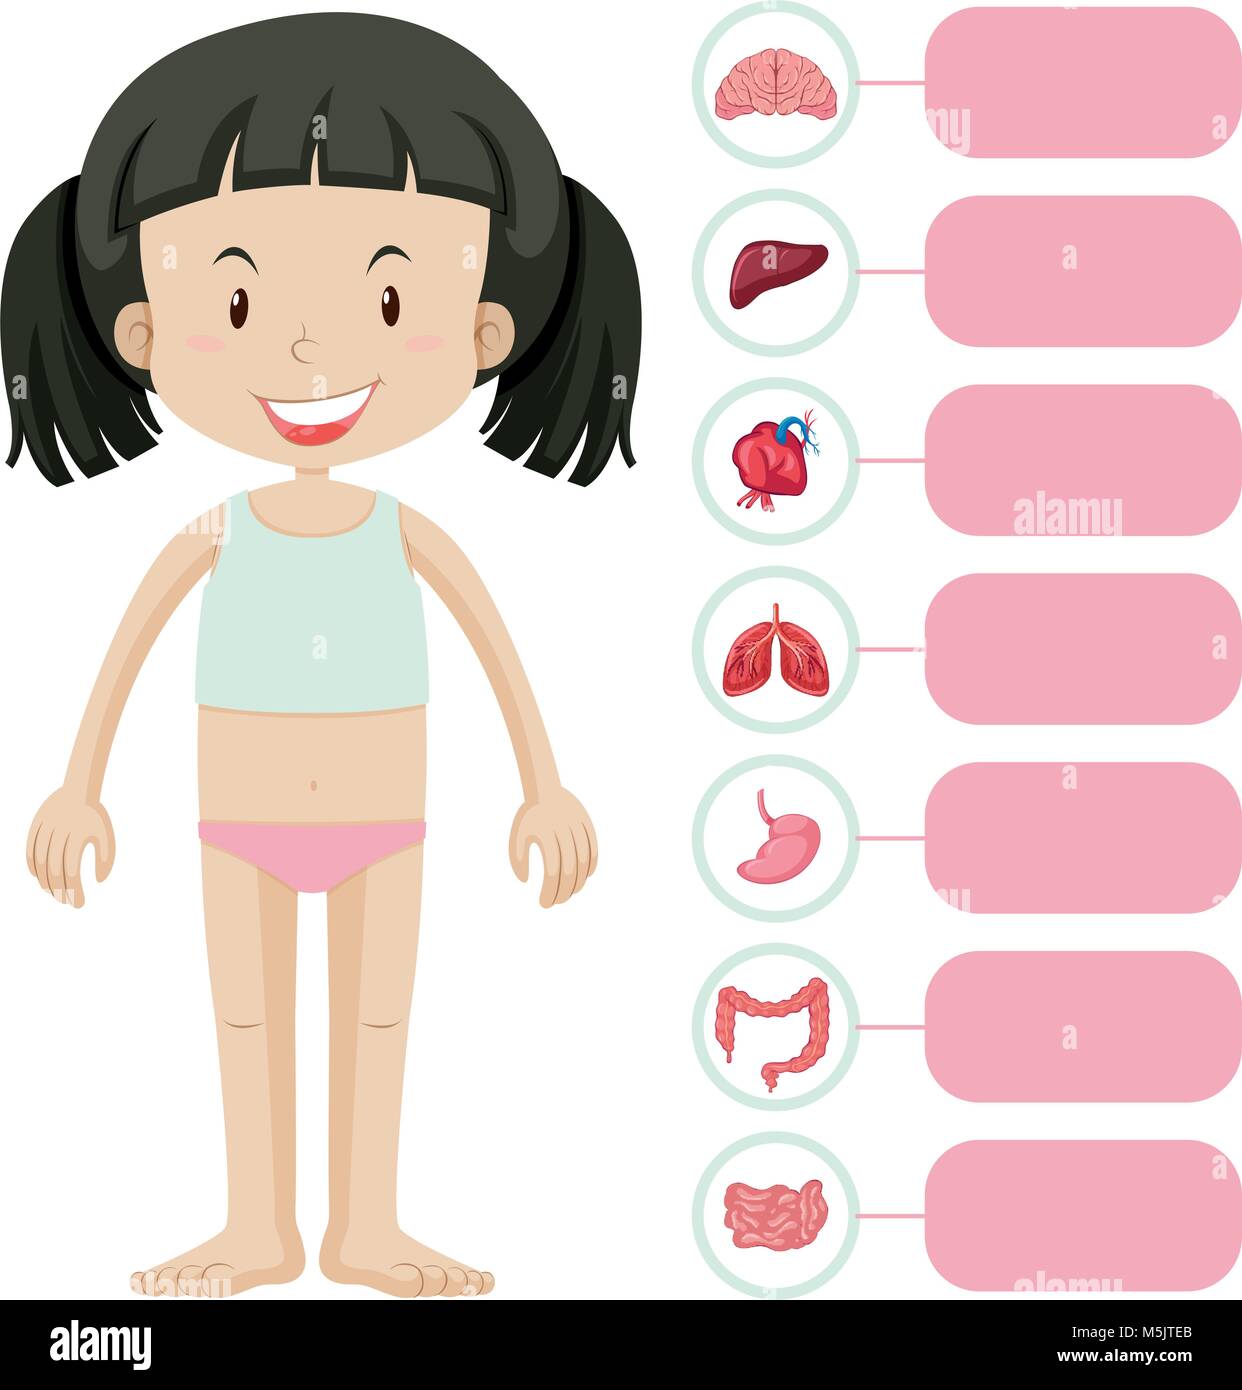 Little girl and different parts of body illustration Stock Vector